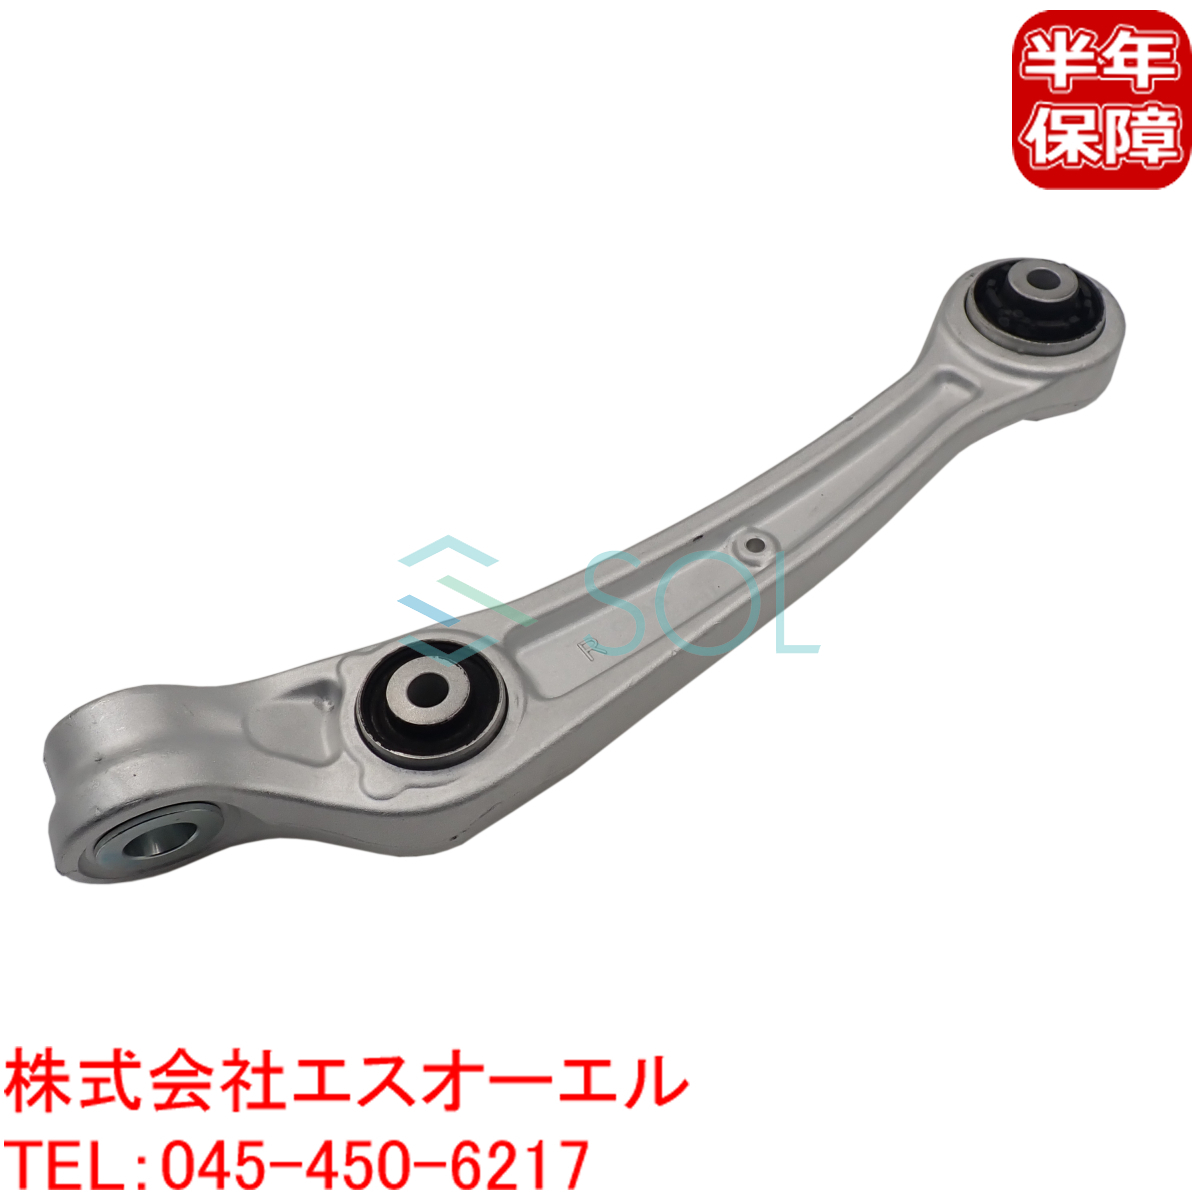  Audi A6 C7(4G2 4GC 4G5 4GD) A7(4GA 4GF) Q5(8RB) front lower arm control arm right front side 8K0407152D 8K0407152B 8K0407152C